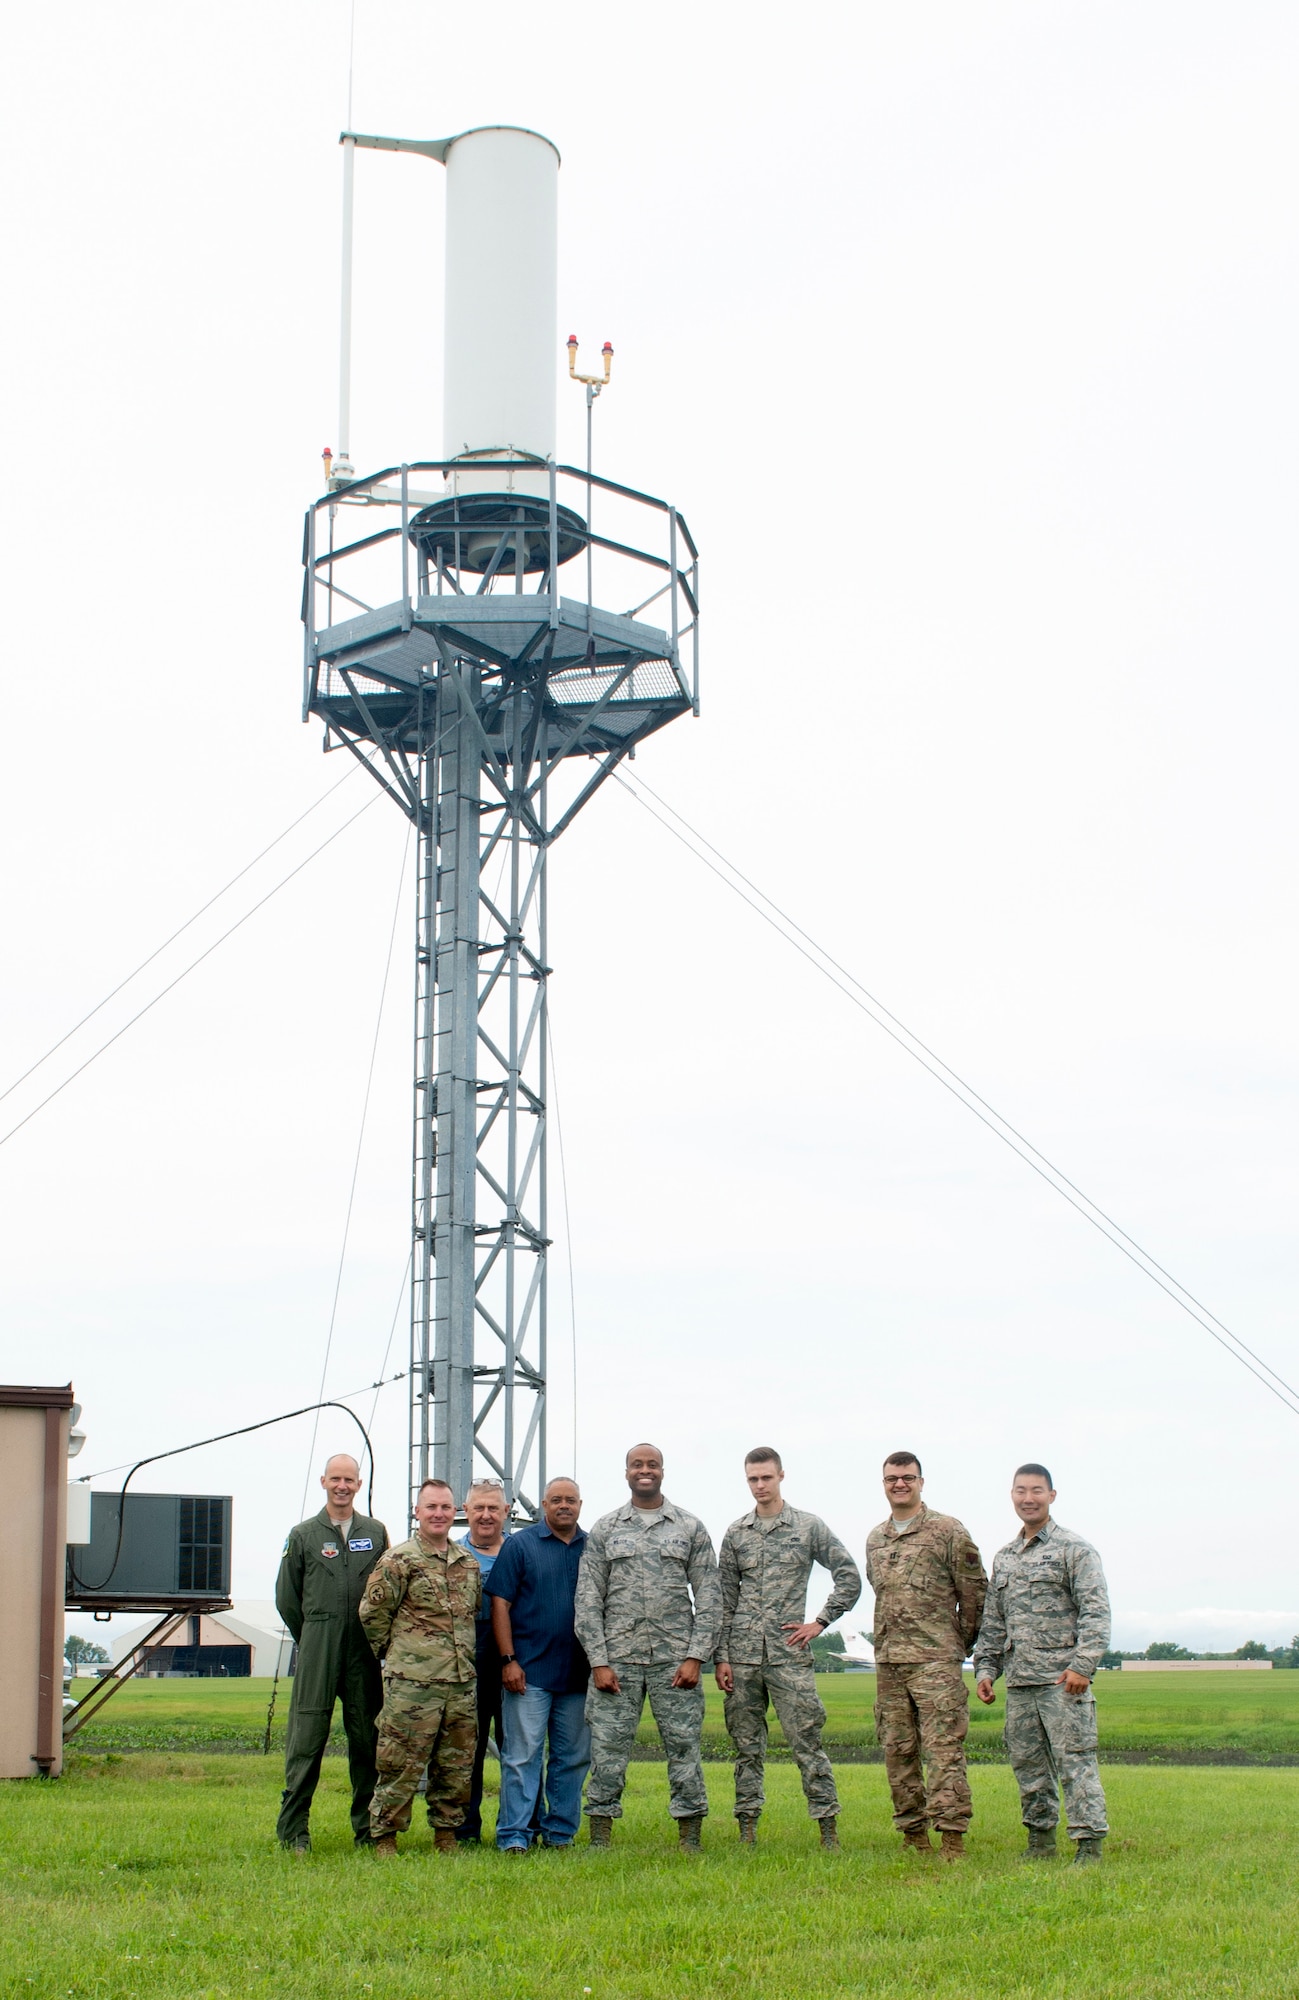 The Tactical Air Navigational System repair team pose for group photo in front of TACAN antenna June 22, 2019, at Offutt Air Force Base, Nebraska. They removed damaged components, replacing them and aligning the system and performing peak tuning to optimize electronics in preparation for the Federal Aviation Administration to certify newly installed system. (U.S. photo by L. Cunningham)